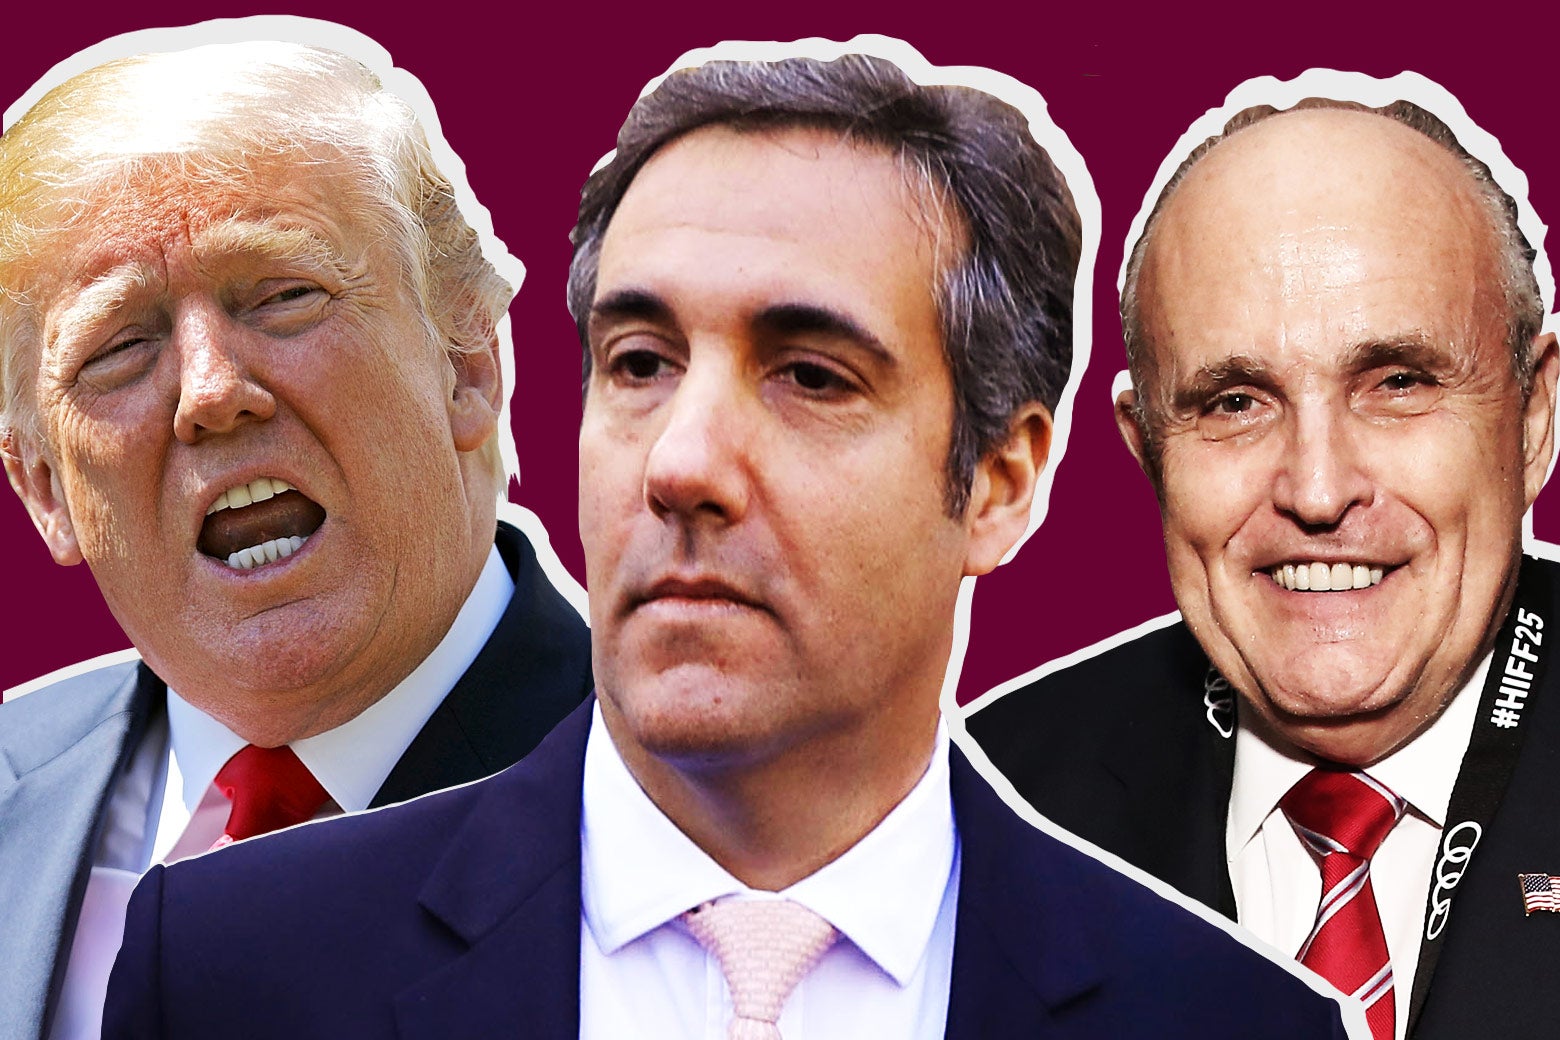 President Donald Trump, his longtime personal lawyer Michael Cohen, and new lawyer Rudy Giuliani.